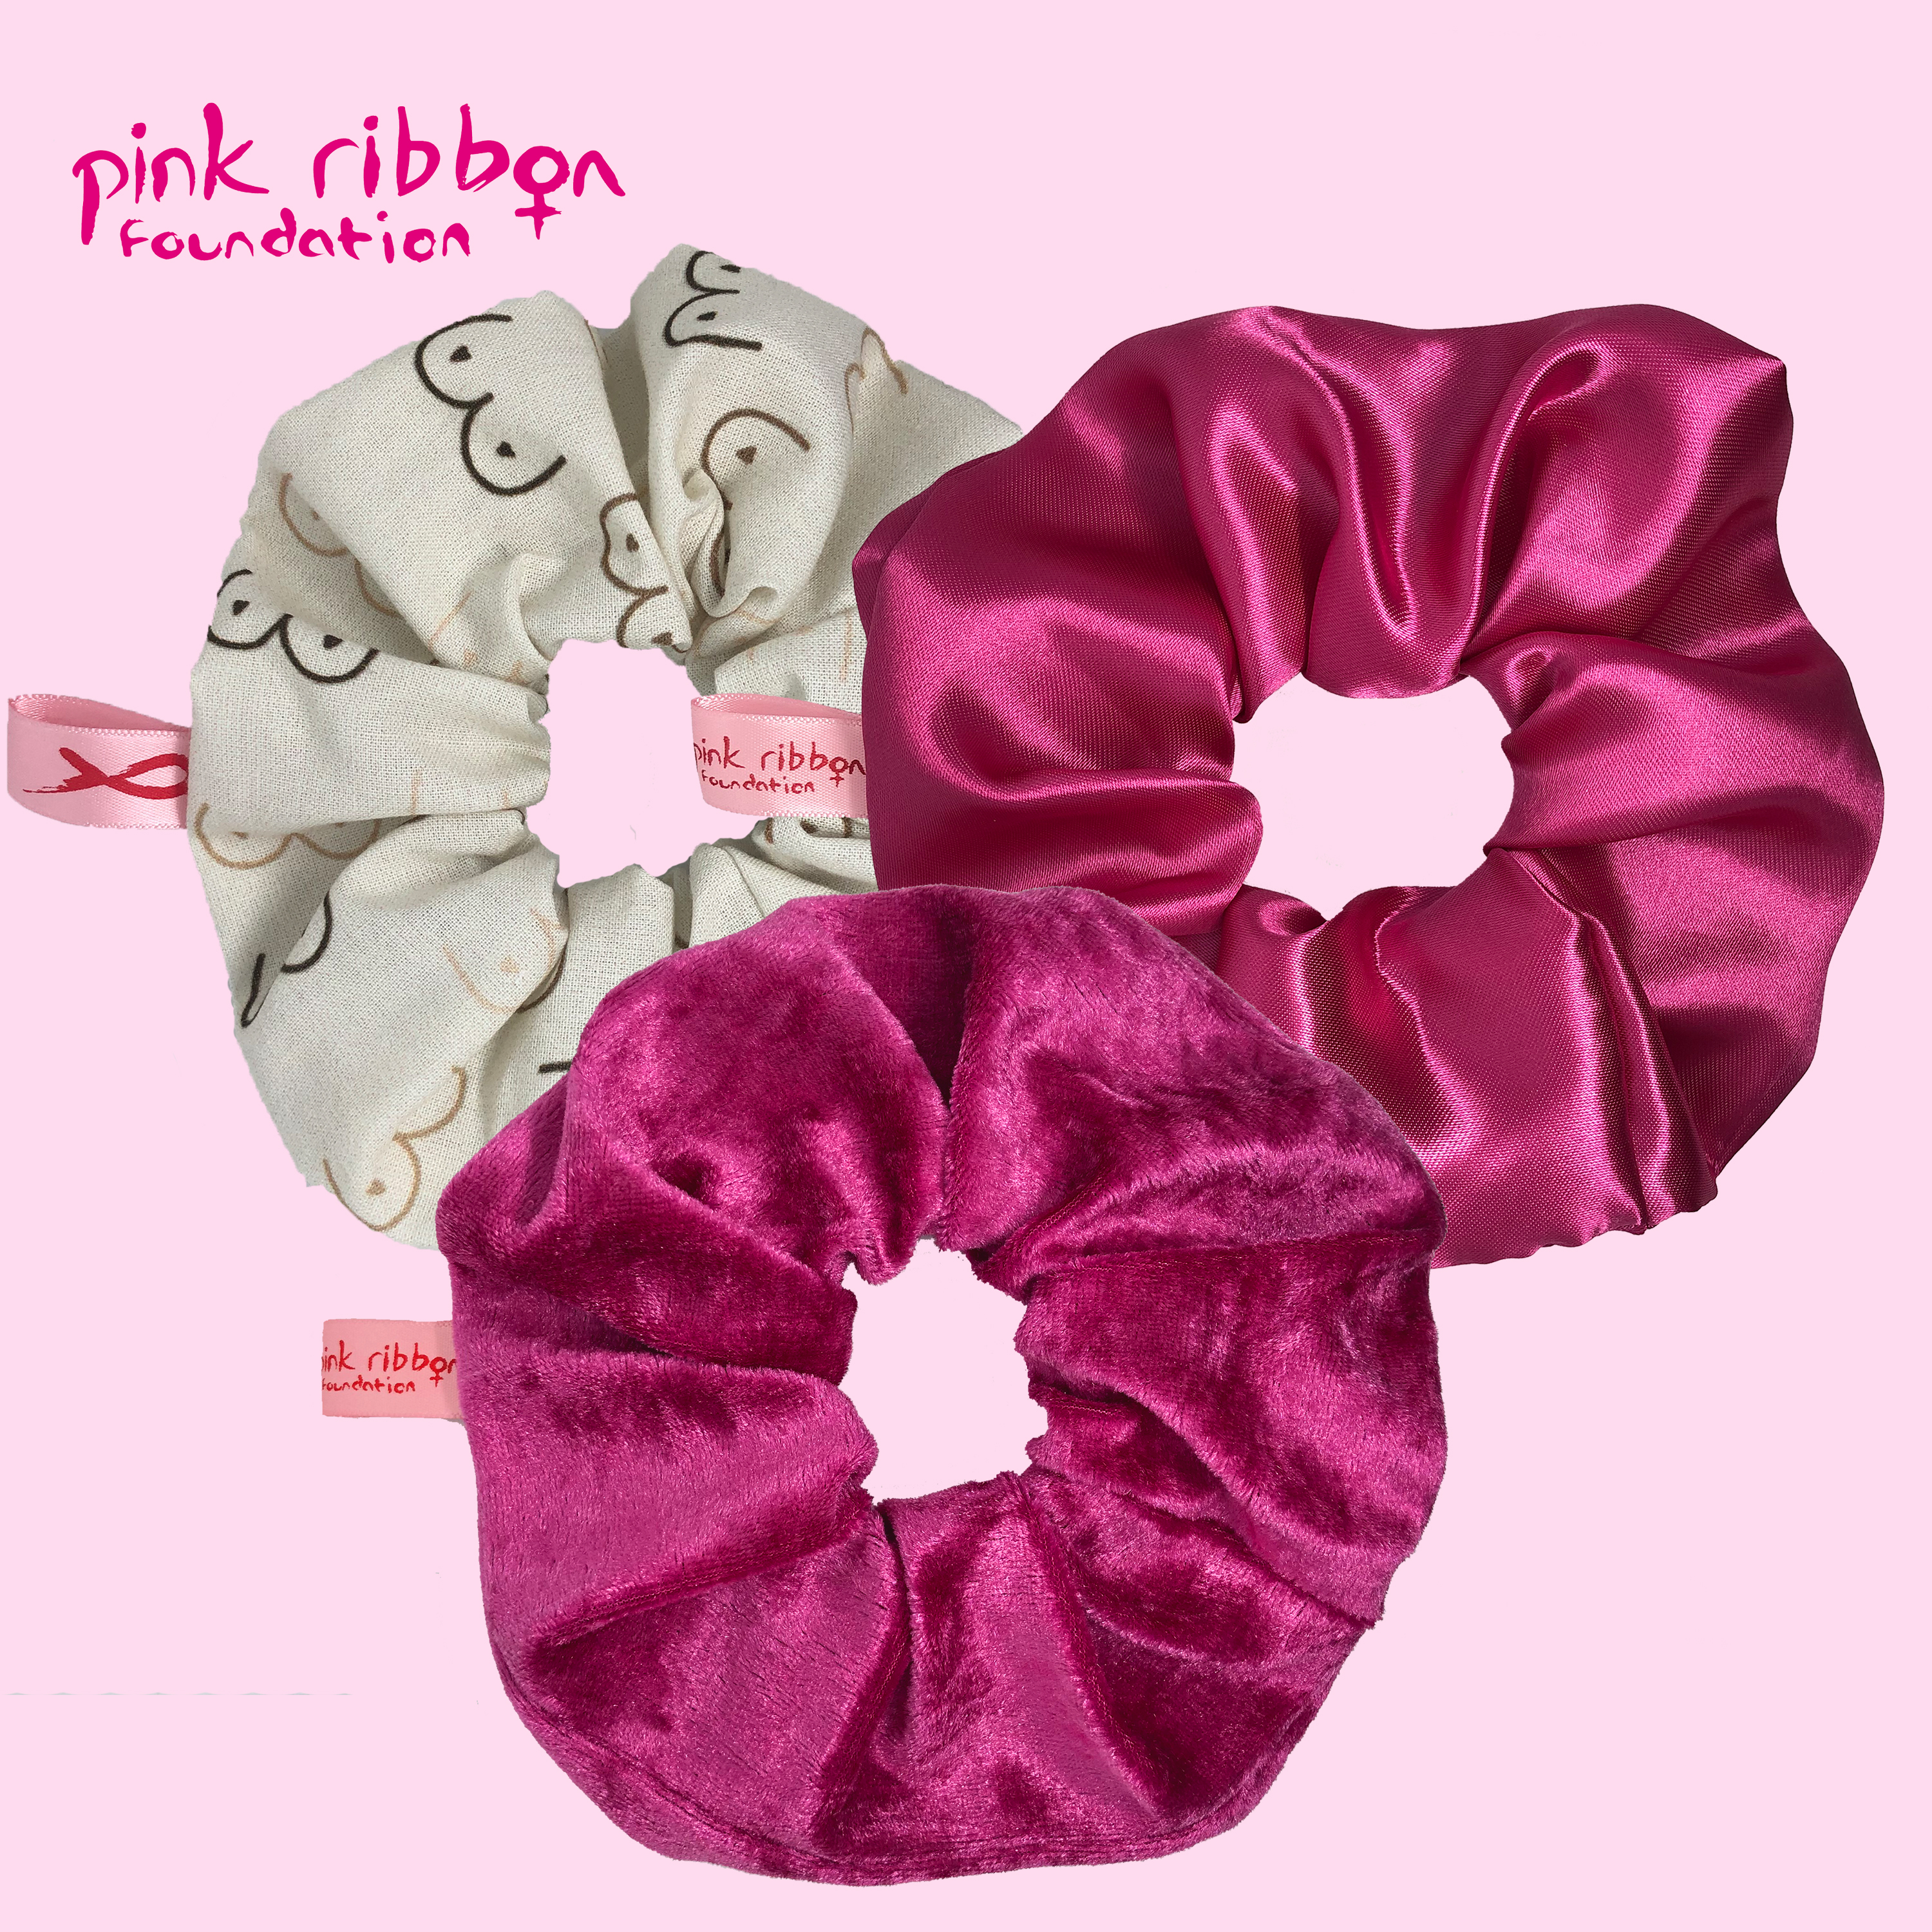 Lazy Lamb Co partners with the Pink Ribbon Foundation